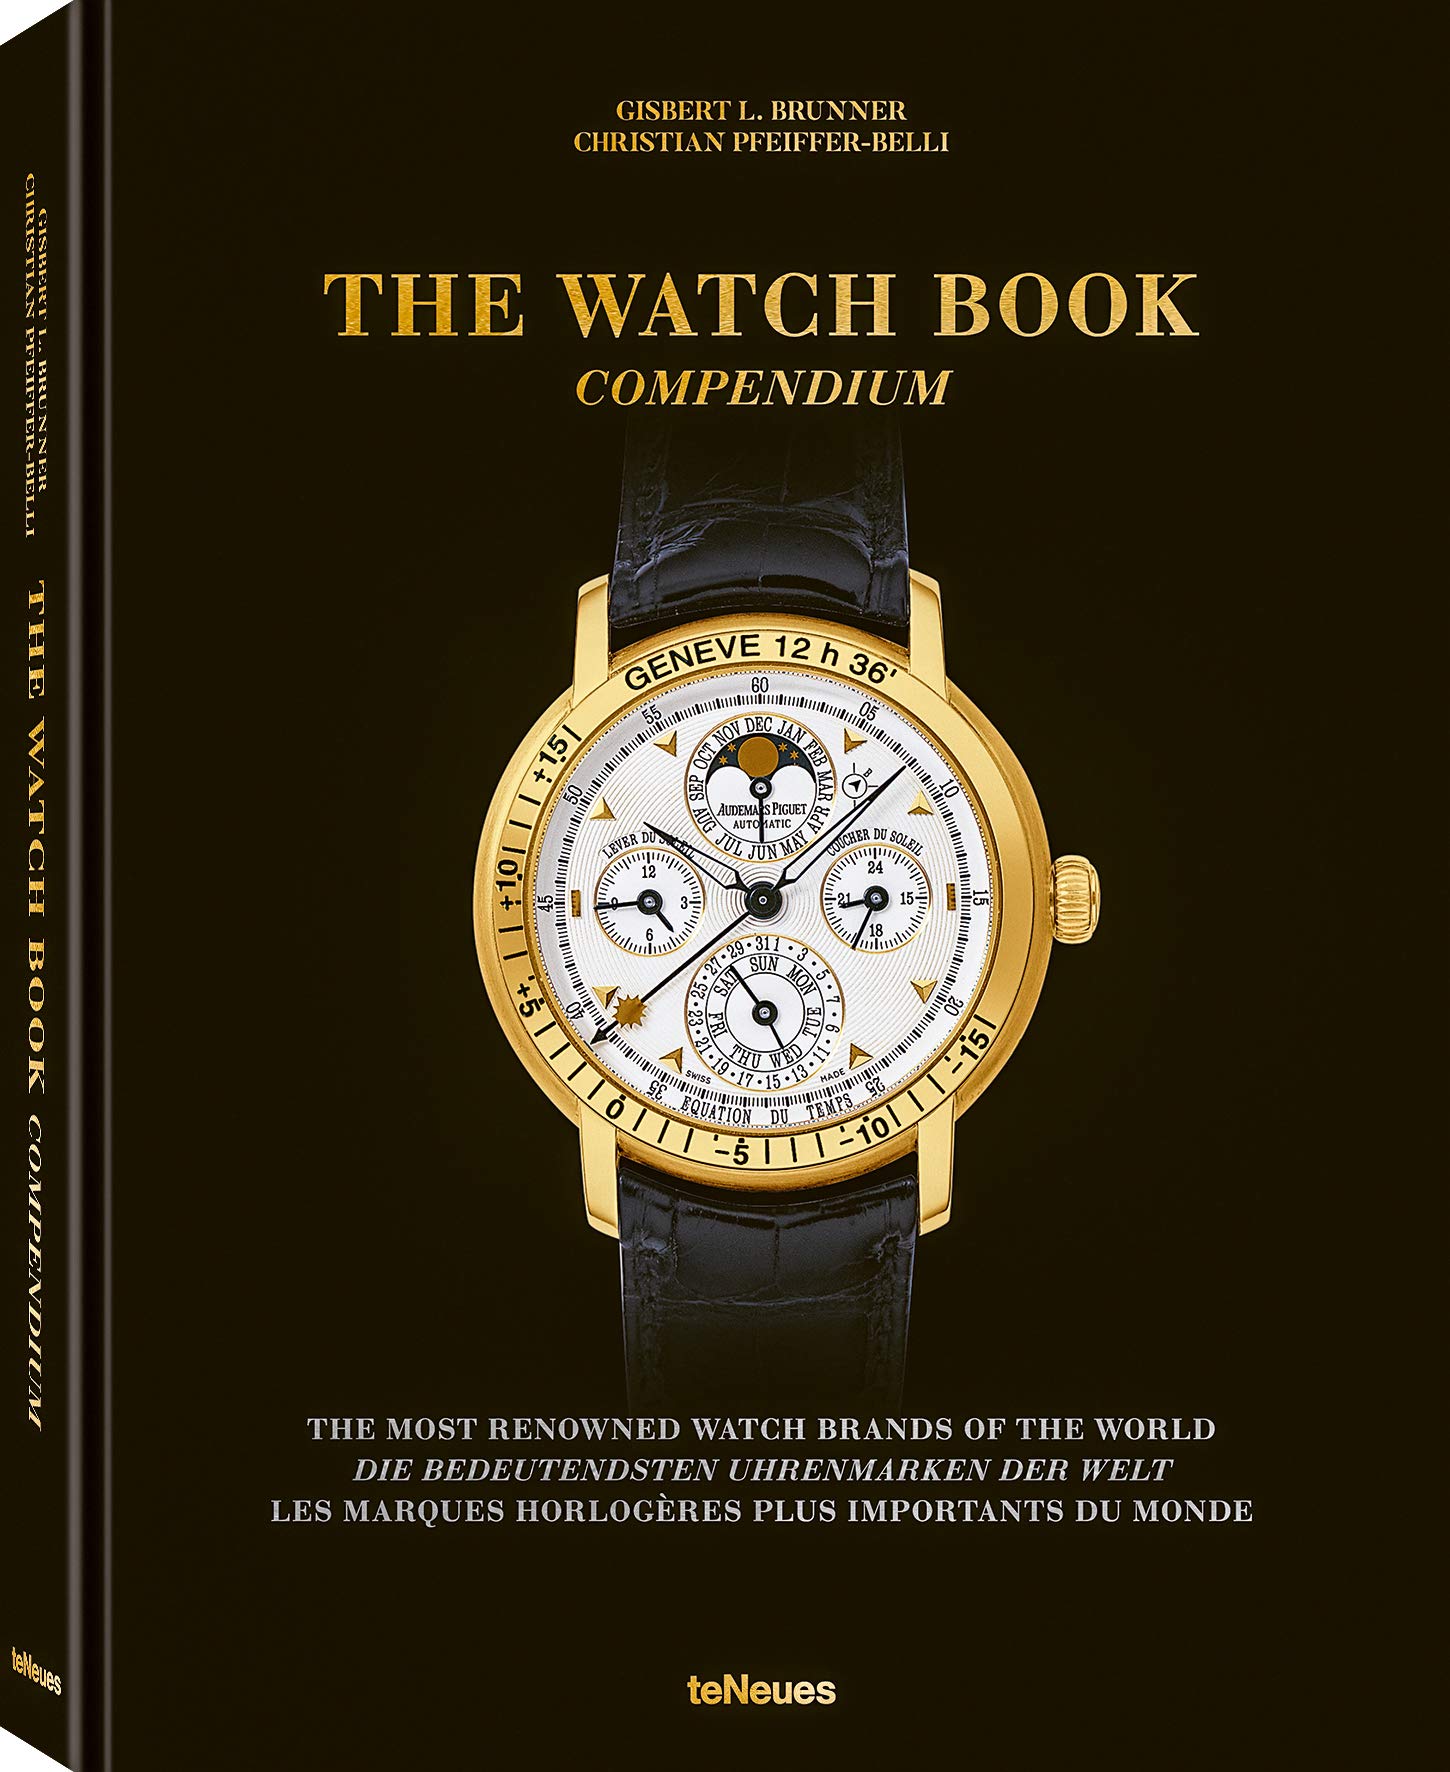 The Watch Book Compendium by Gisbert Brunner illustrated book cover